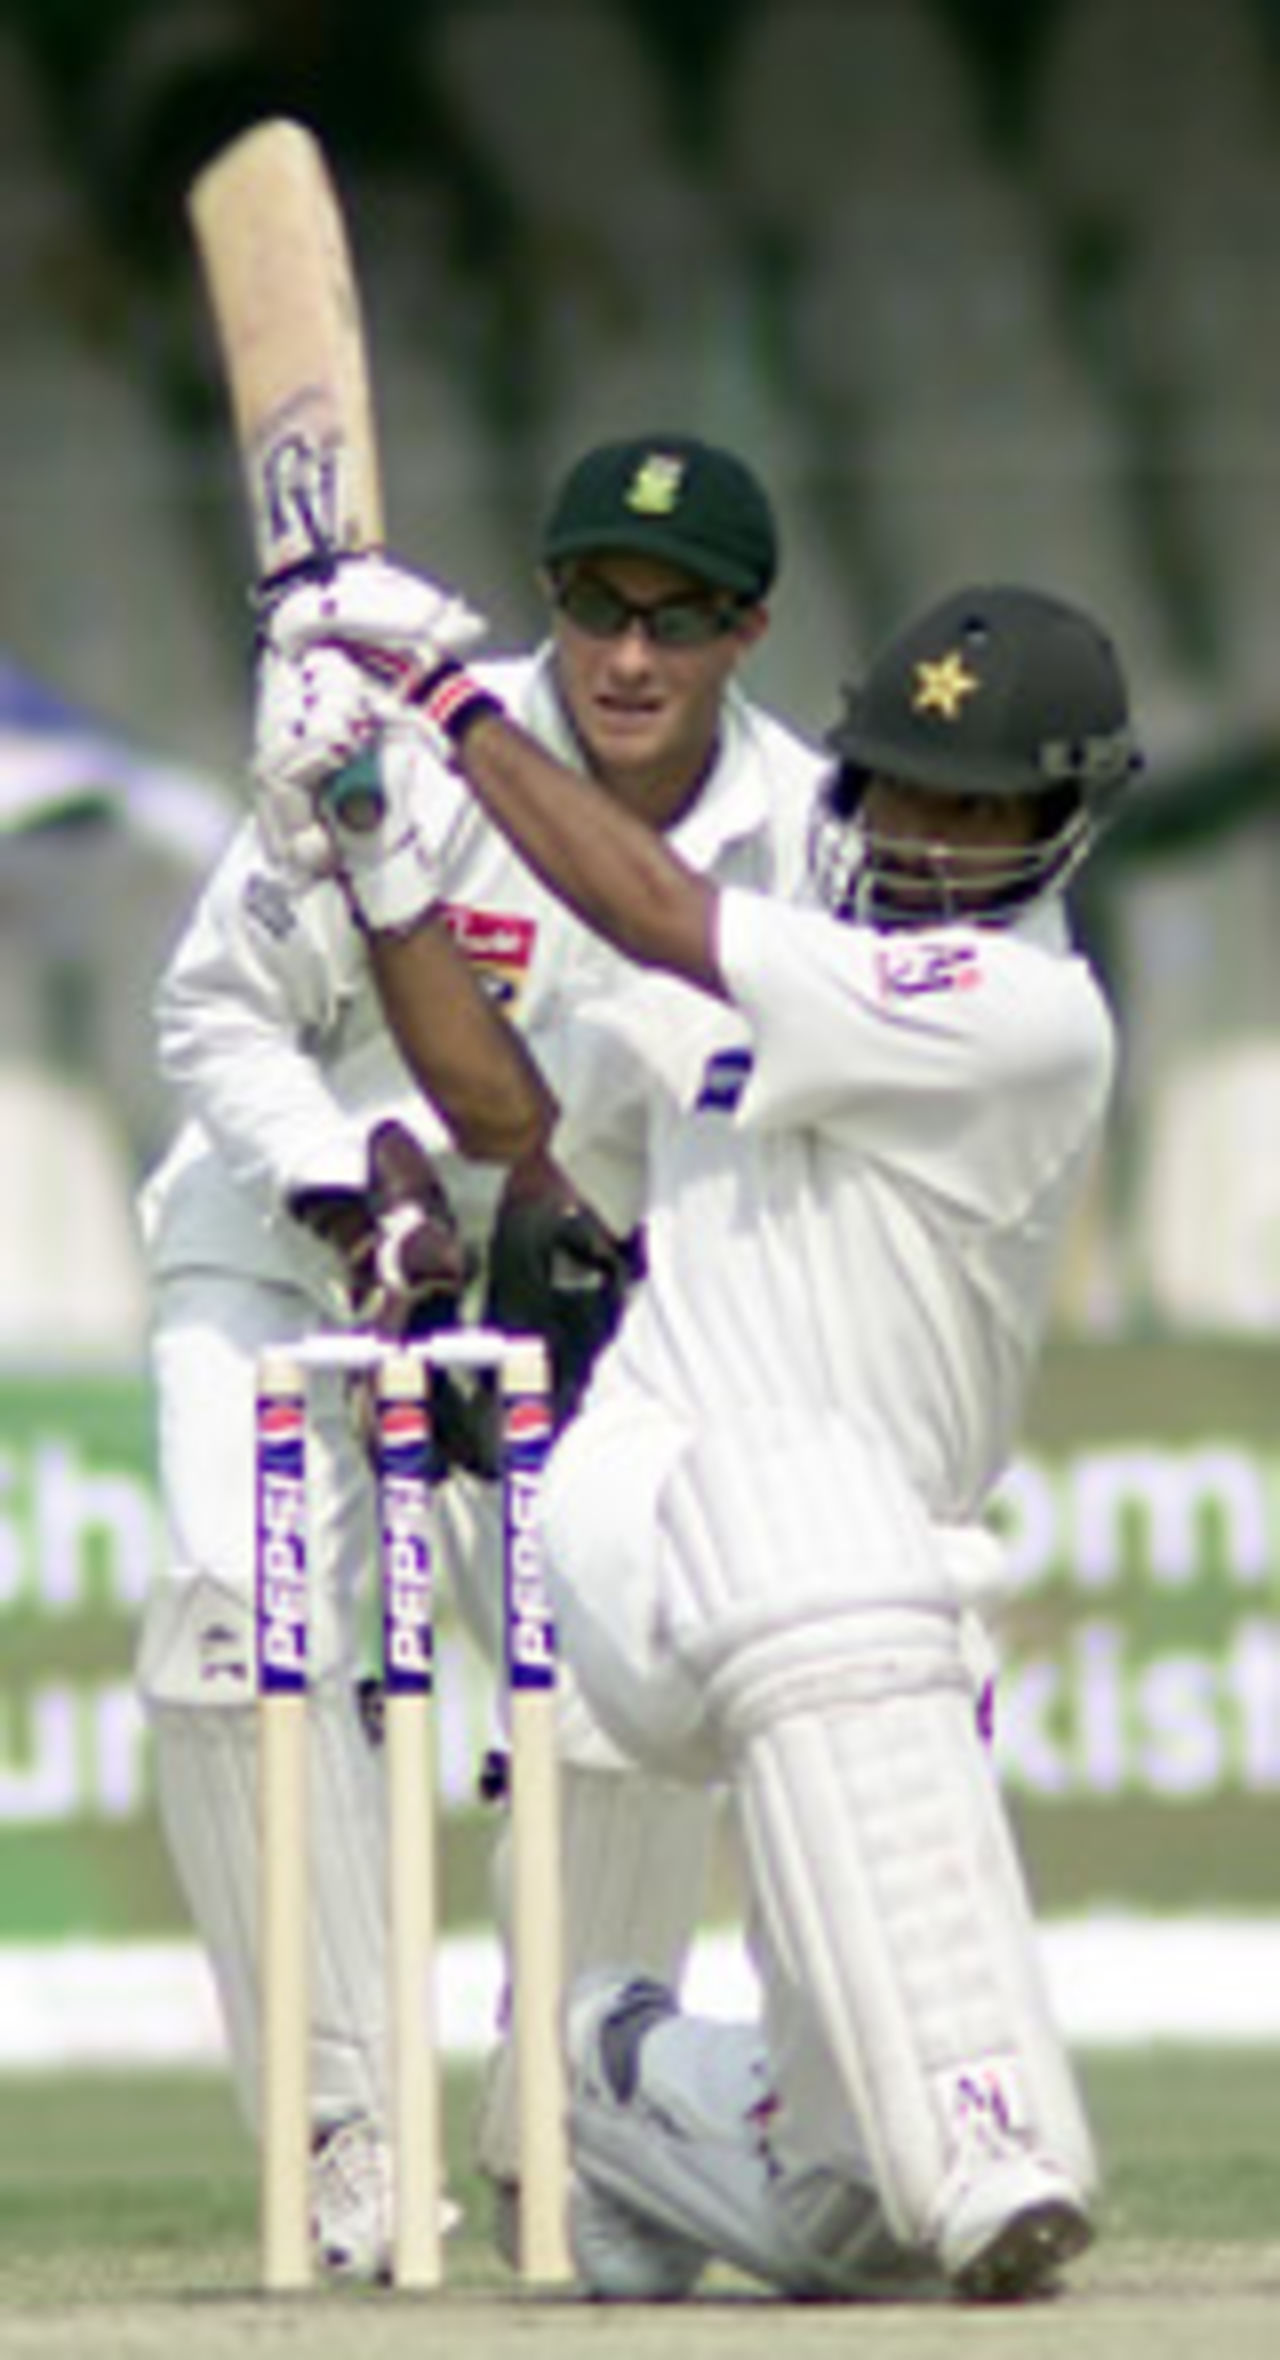 Asim Kamal hitting to leg on his way to 99, Pakistan v South Africa, Day 3, 1st Test, Lahore, October 19, 2003.